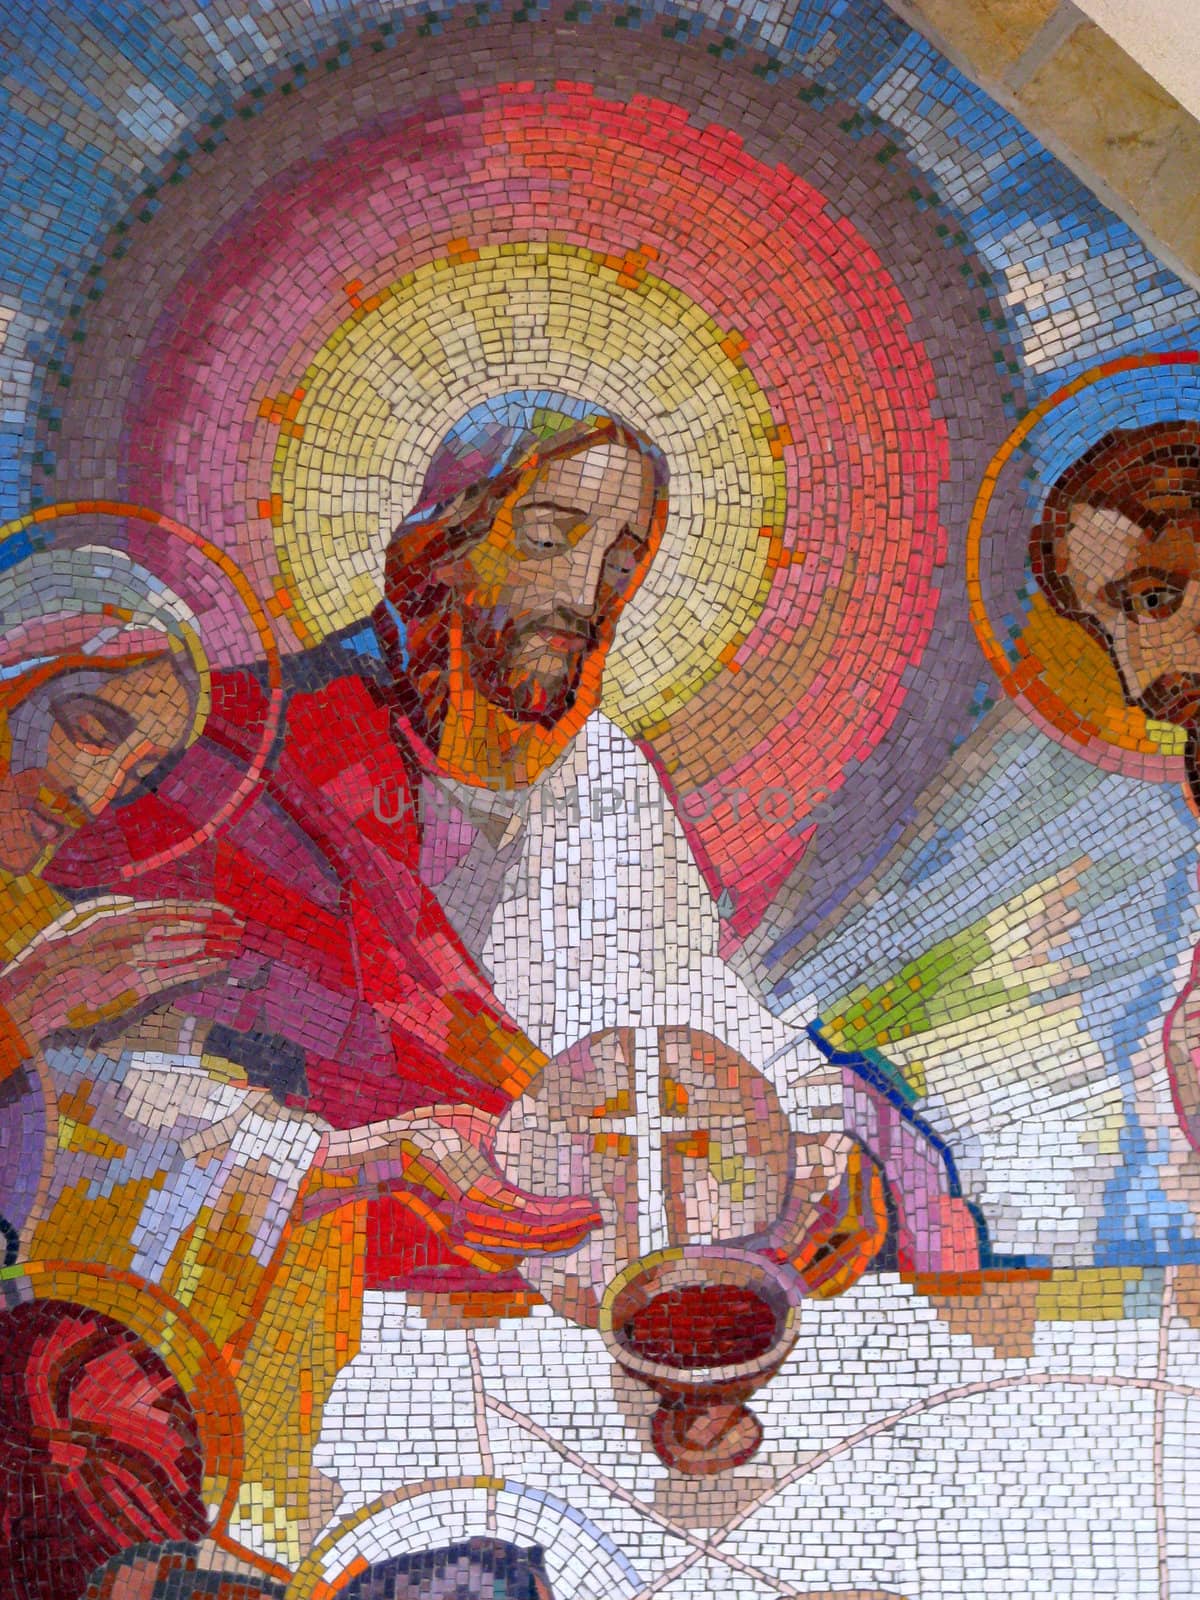 A detail of a mosaic in Medjugorje representing the Fifth Mystery of the Luminous Rosary.